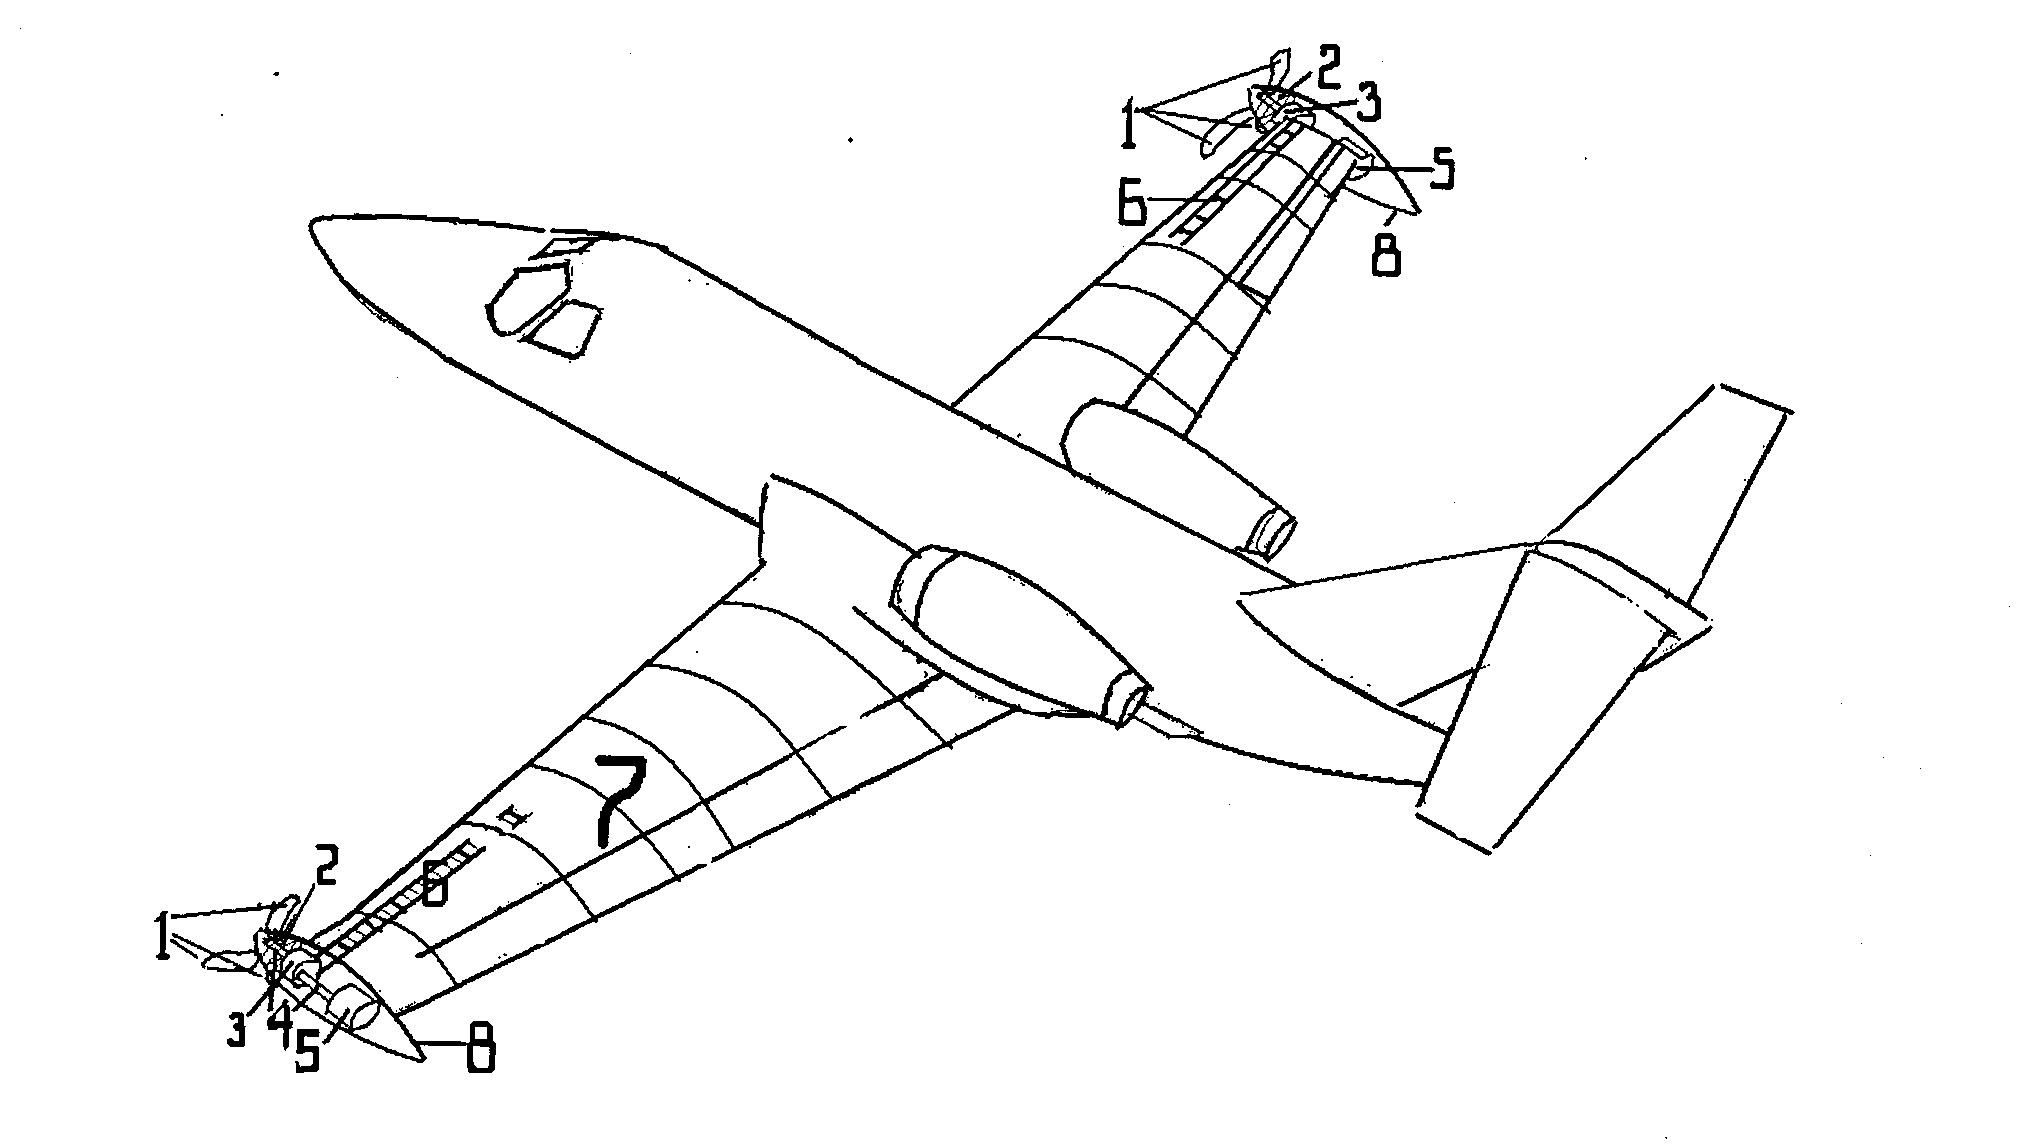 Multifunction wing tip turbine engine having fore-lying impellers